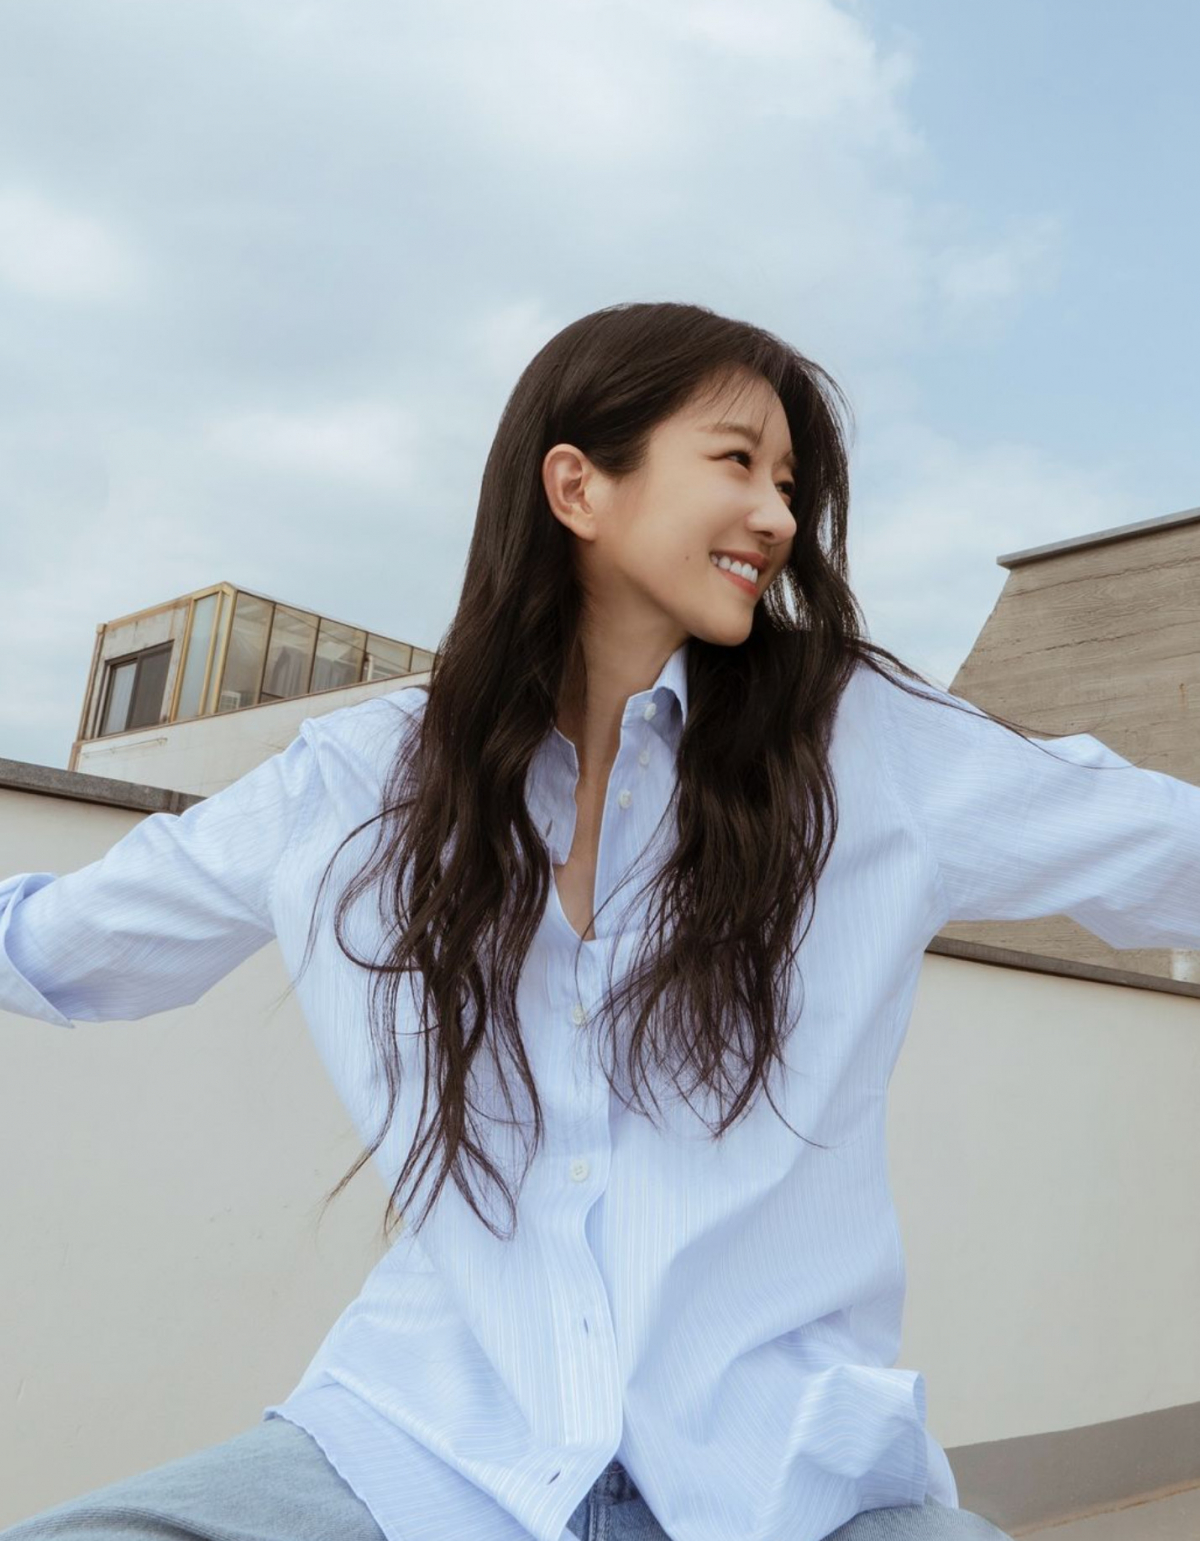 Seo Ye-ji, 3 years after the gaslighting controversy…  Resumption of SNS activities ‘Bright smile’